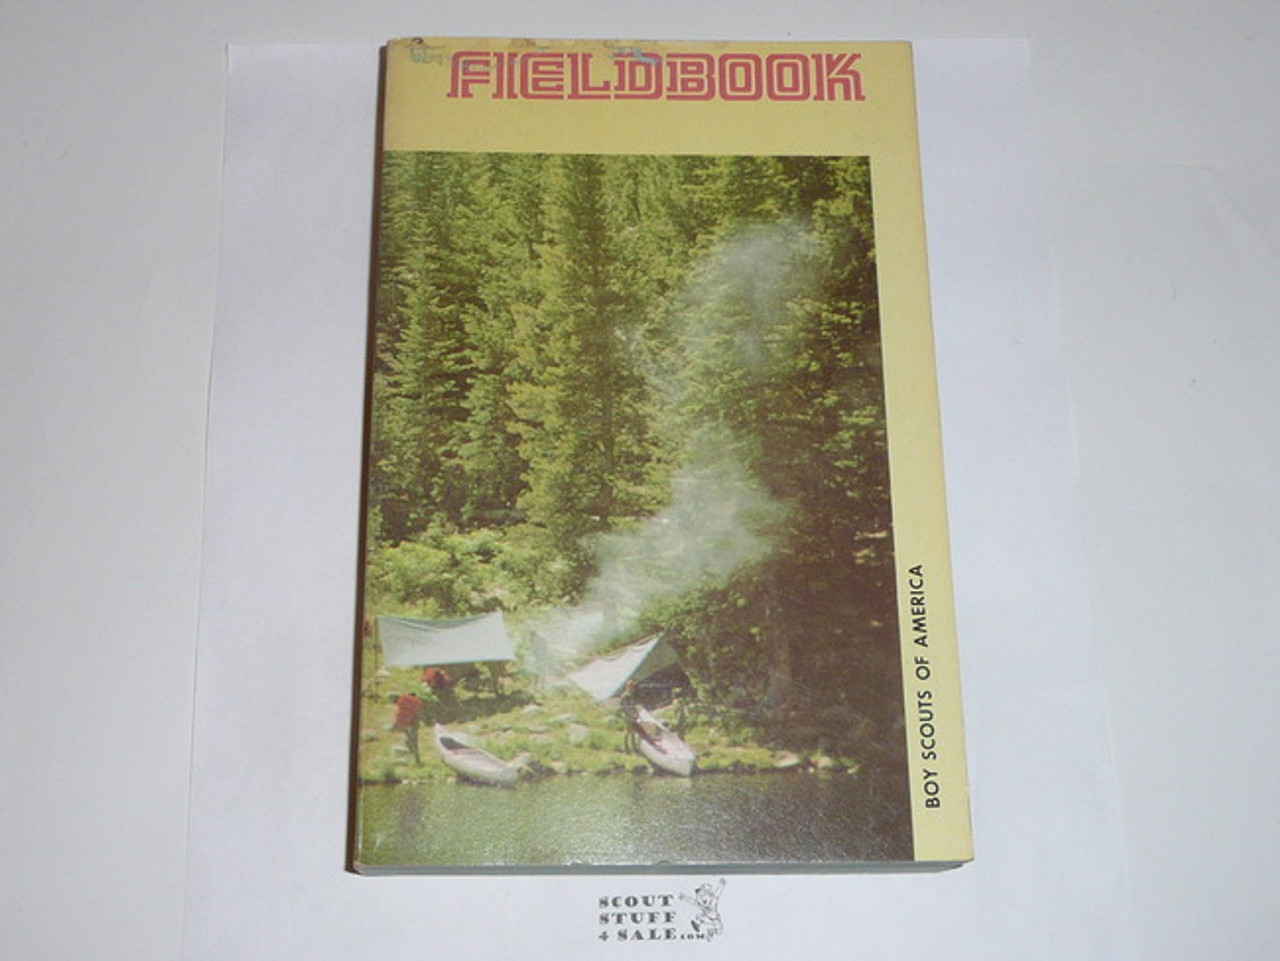 1981 Boy Scout Field Book, Second Edition, Sept 1981 Printing, near MINT condition